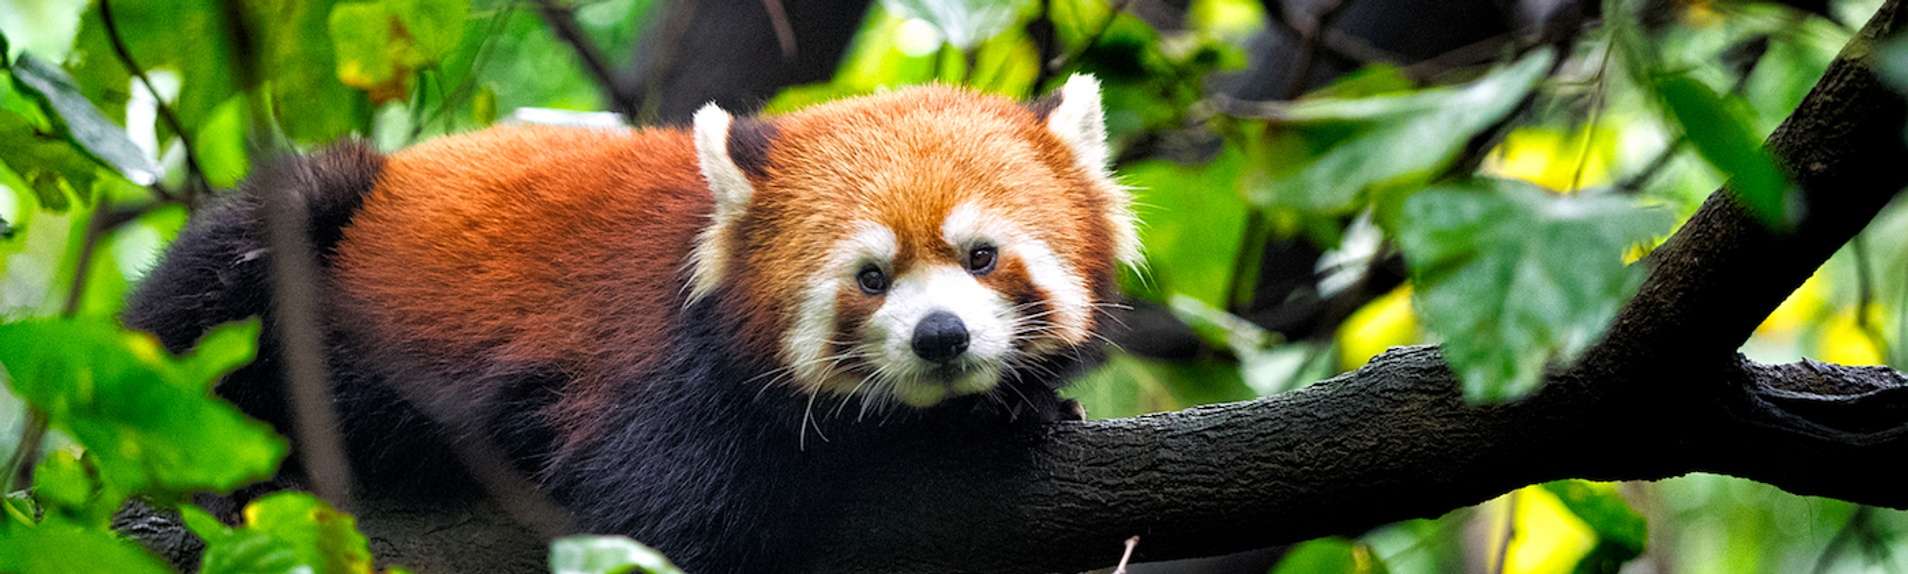 Can You Own A Red Panda In Texas Red Panda Facts China Wildlife Guide